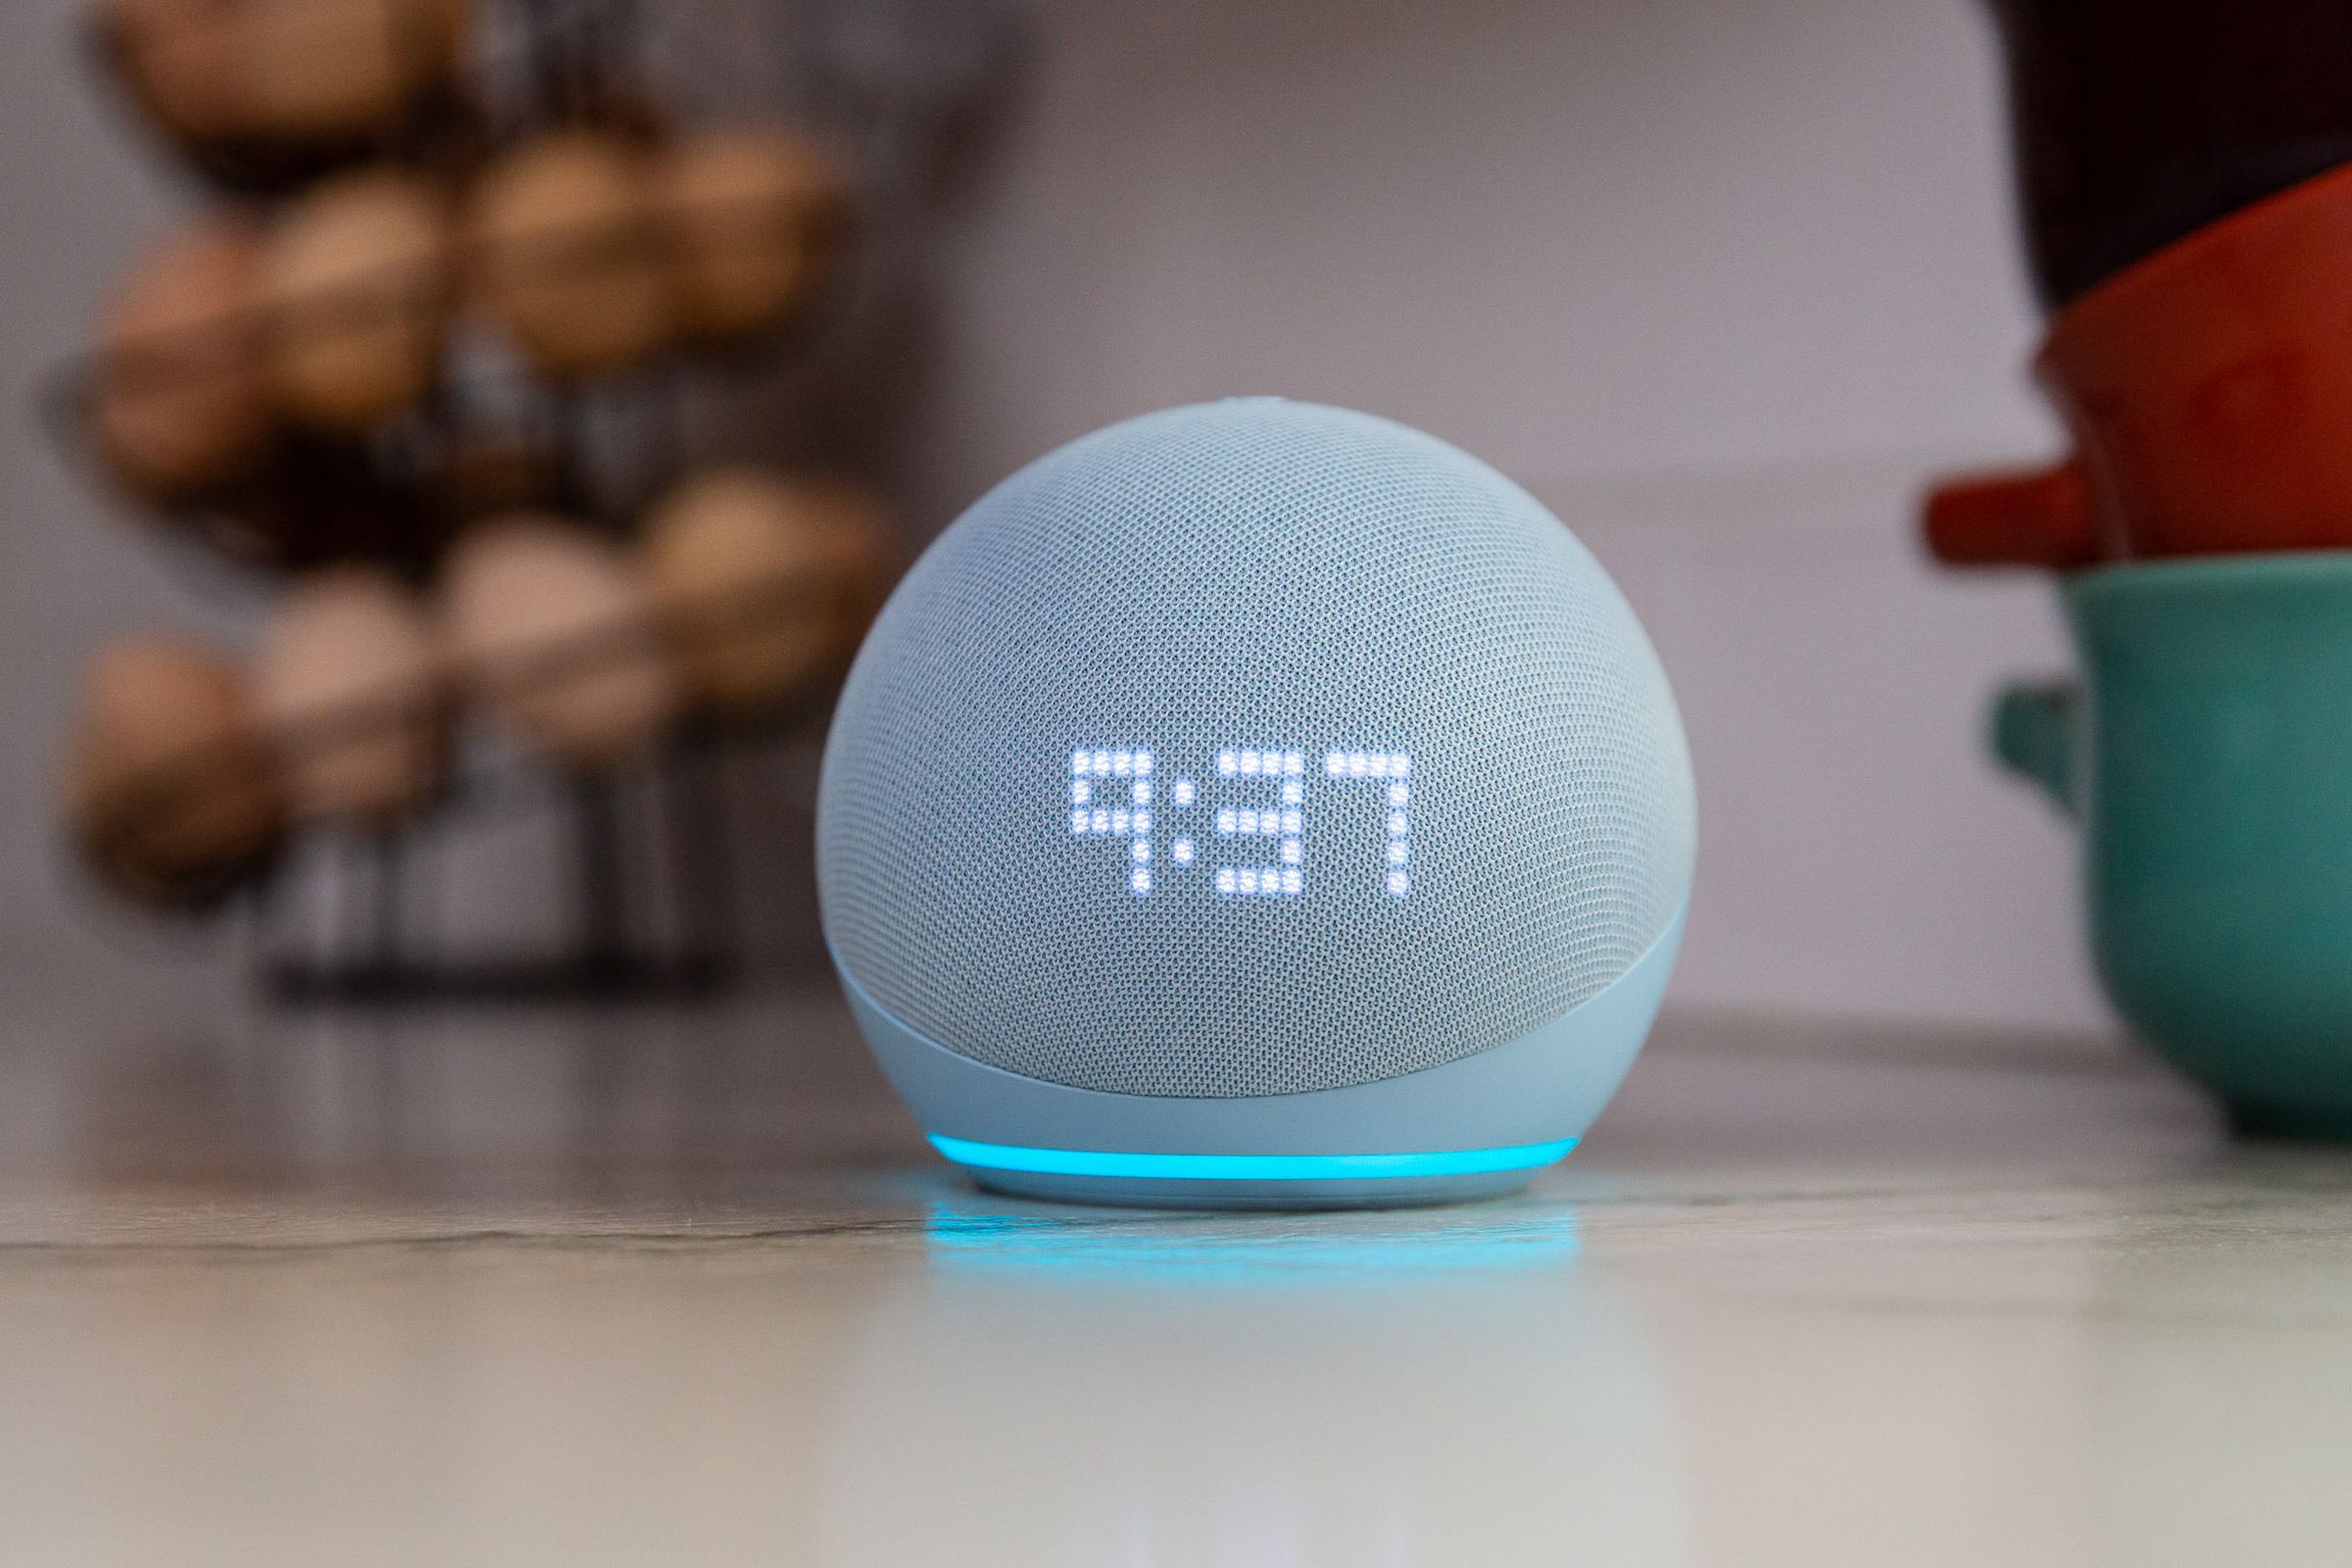 You can already buy the latest clock-equipped Echo Dot for $44.99 ($15 off).